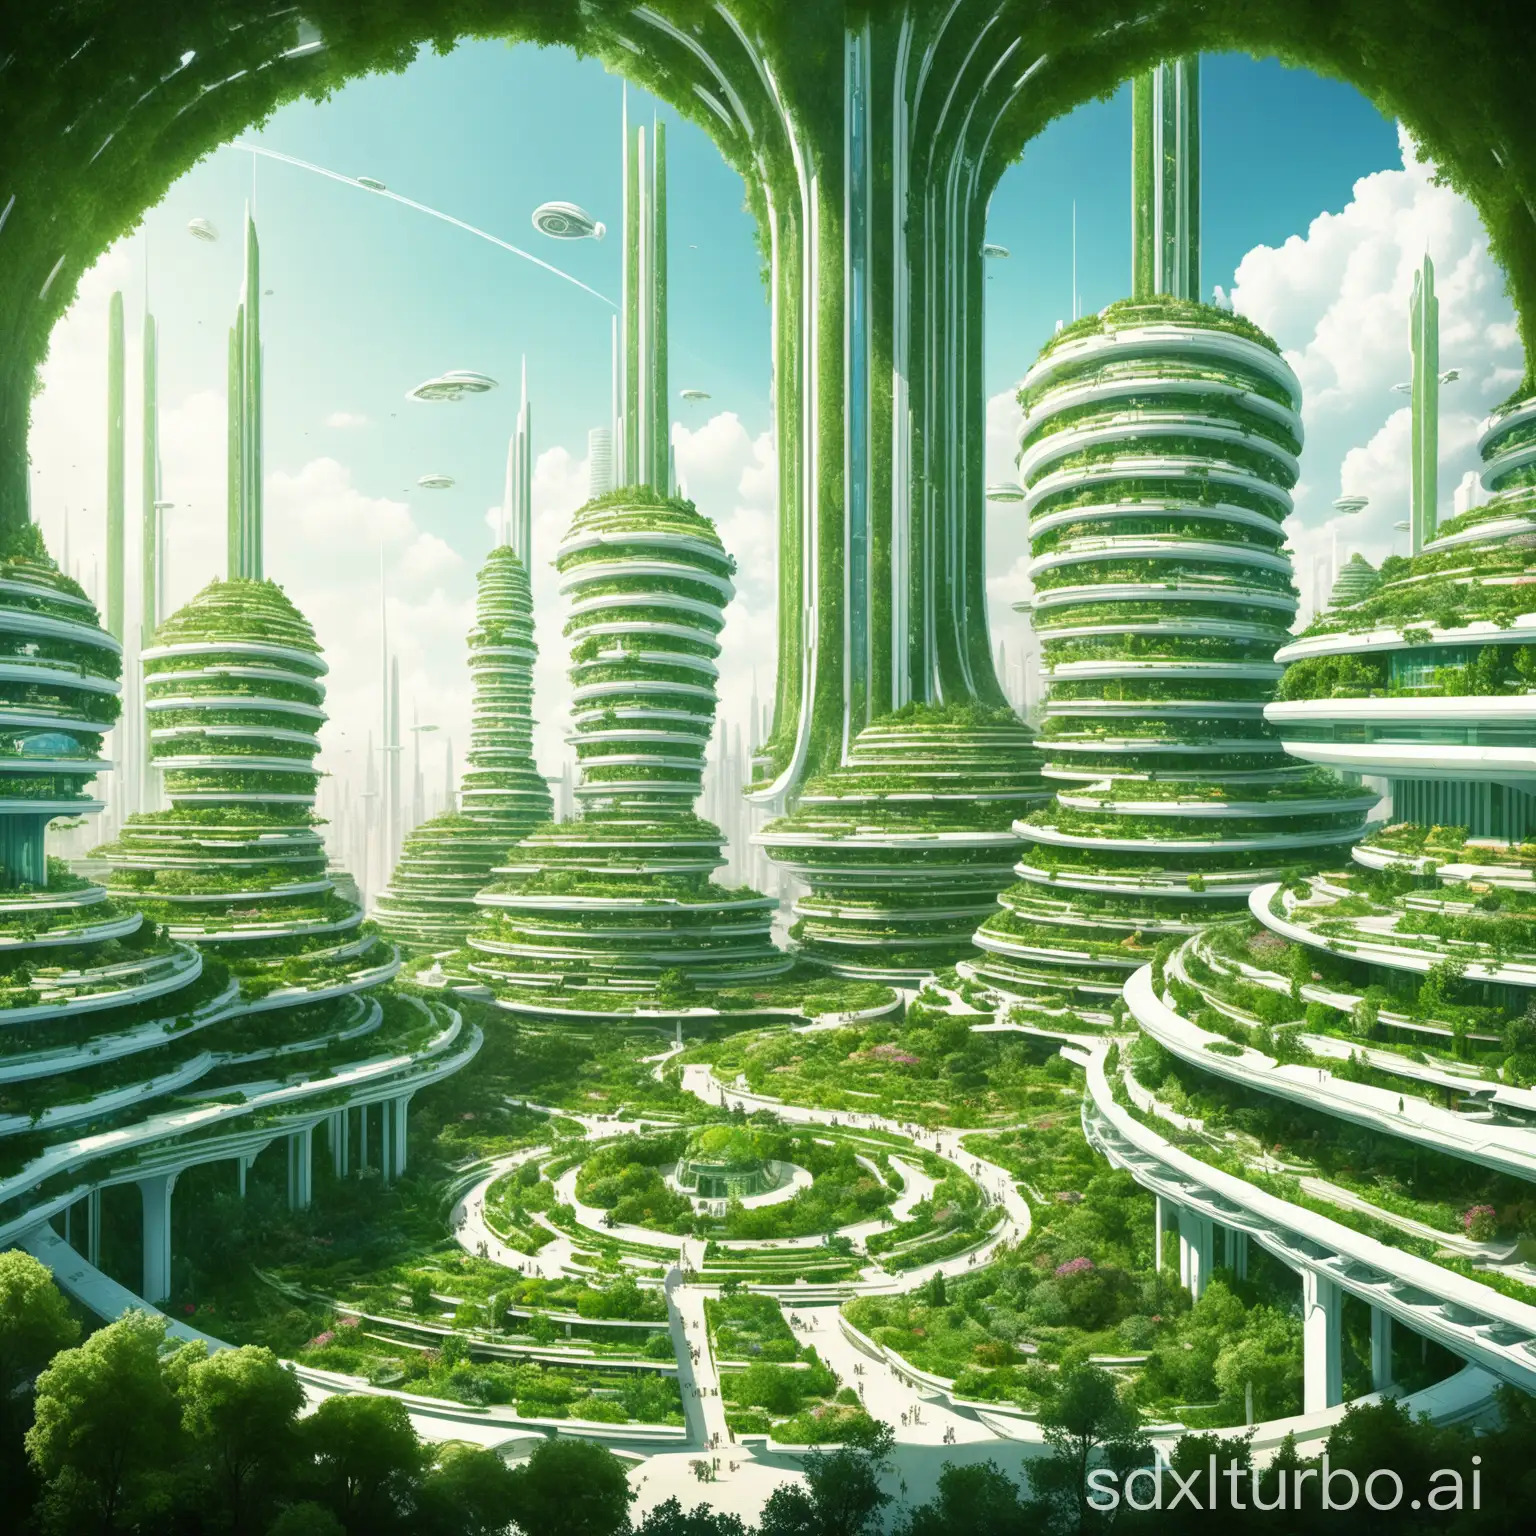 utopian city of the future, a lot of greenery, architecture in the Bozar style